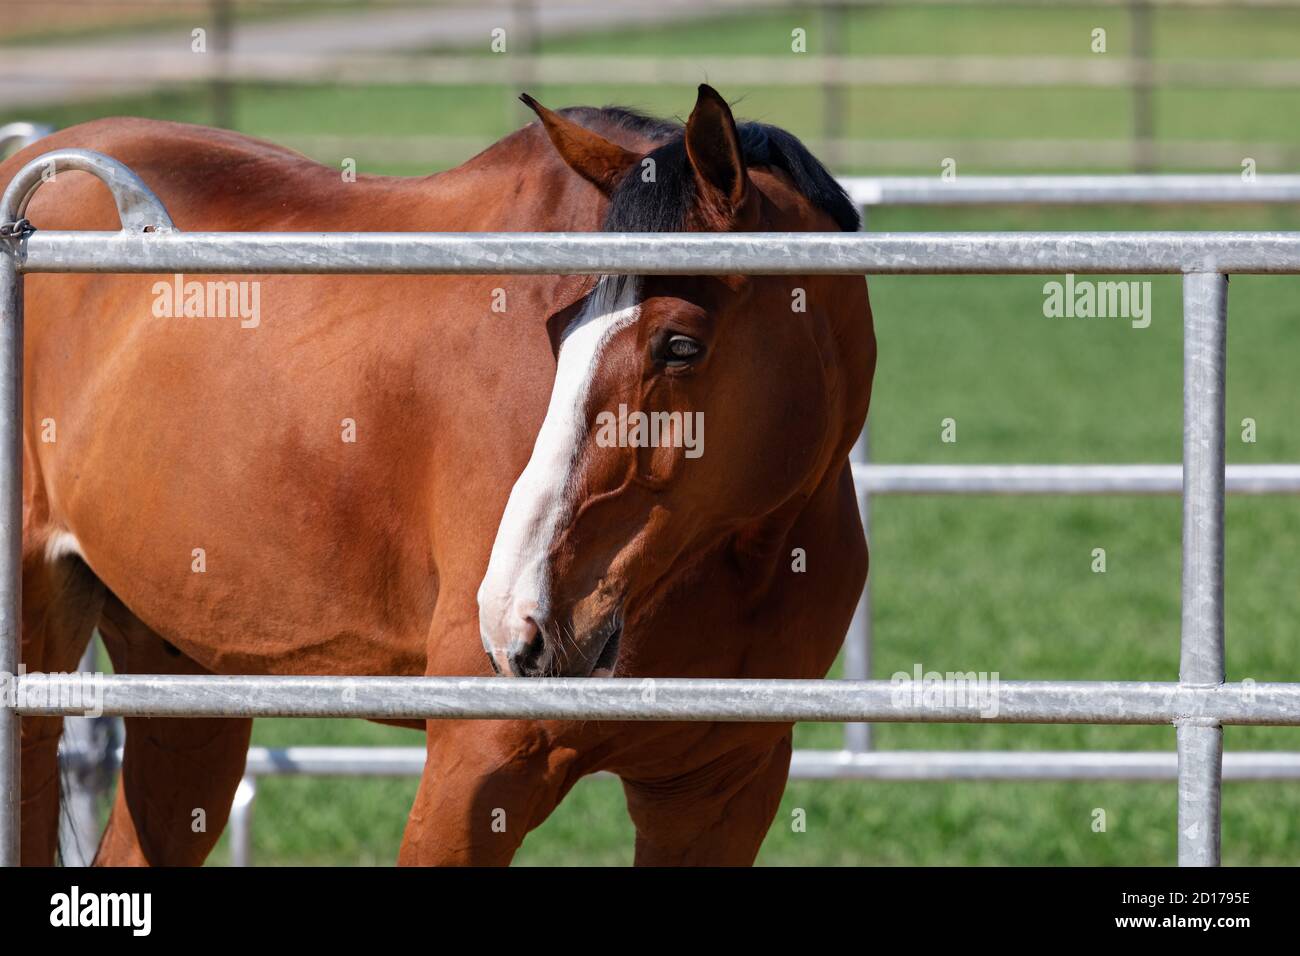 reddish brown standing horse with vibrant colors in a metal grid box, the facial expression looks sad, by day, without persons Stock Photo